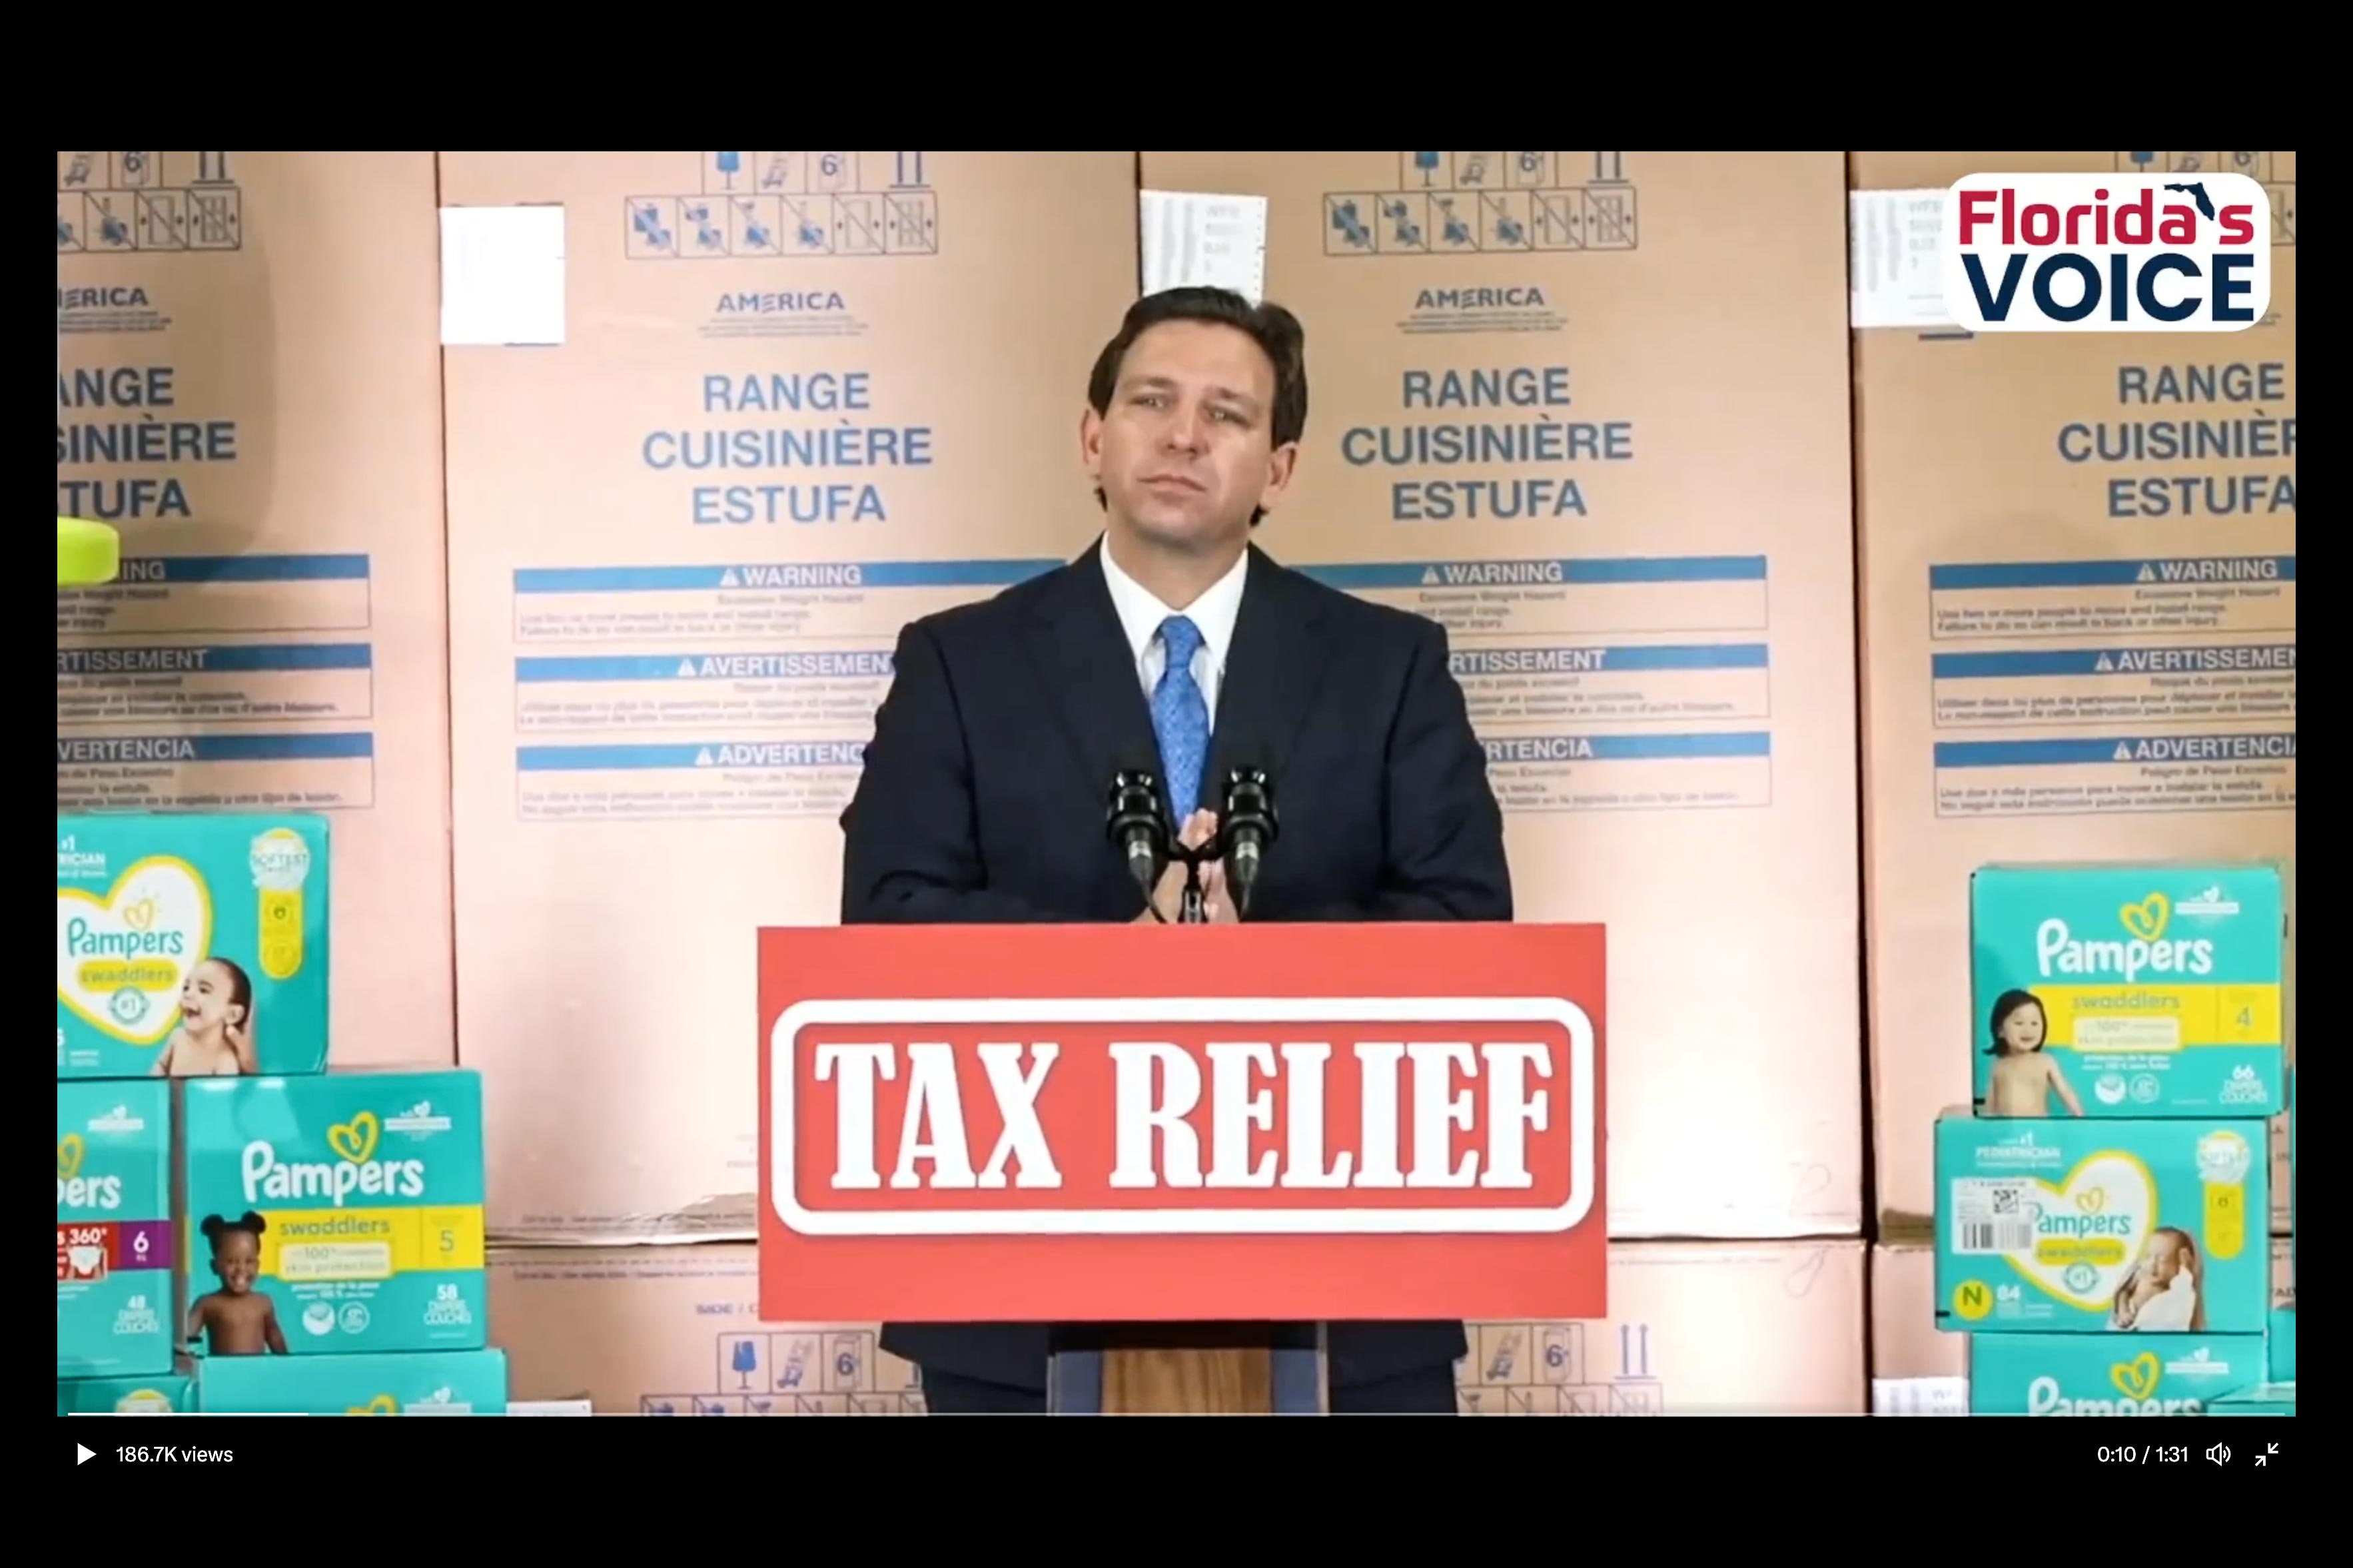 Ron DeSantis, wearing a suit, speaks in front of a backdrop of cardboard boxes containing gas stoves. On each side of him are piles of Pampers diaper boxes.